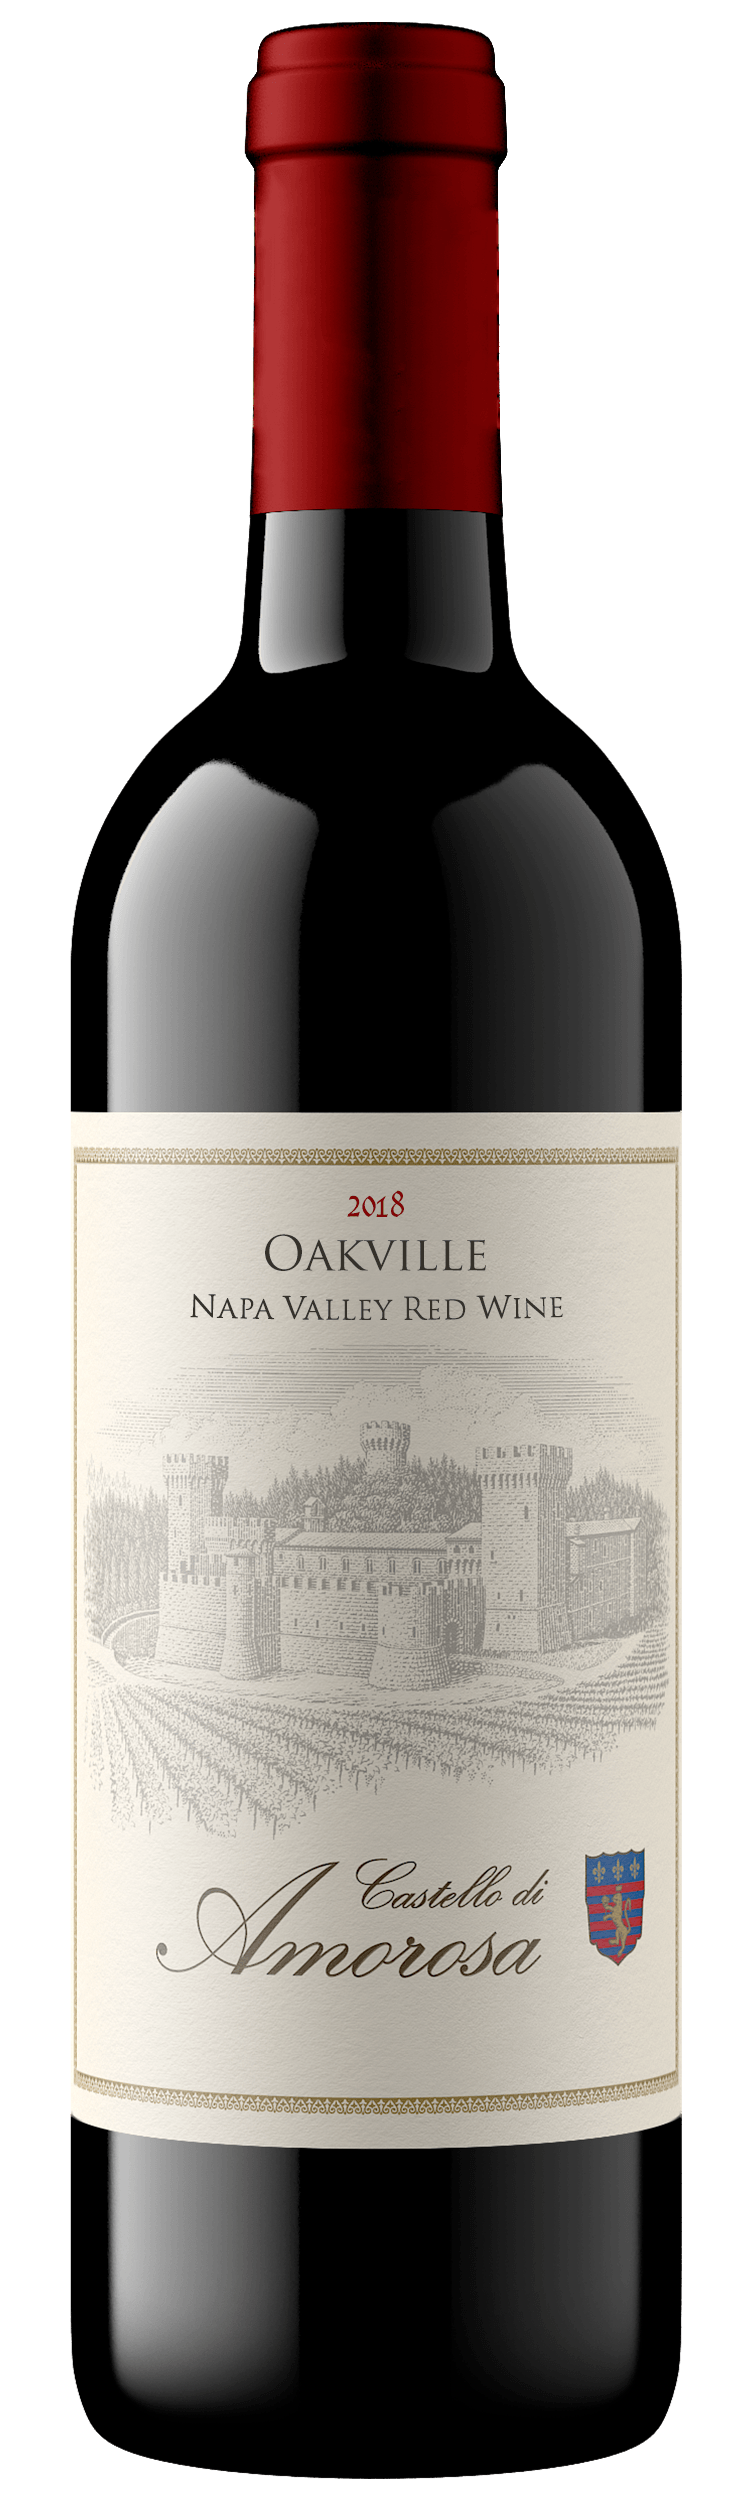 Our 2018 Oakville red blend wine.